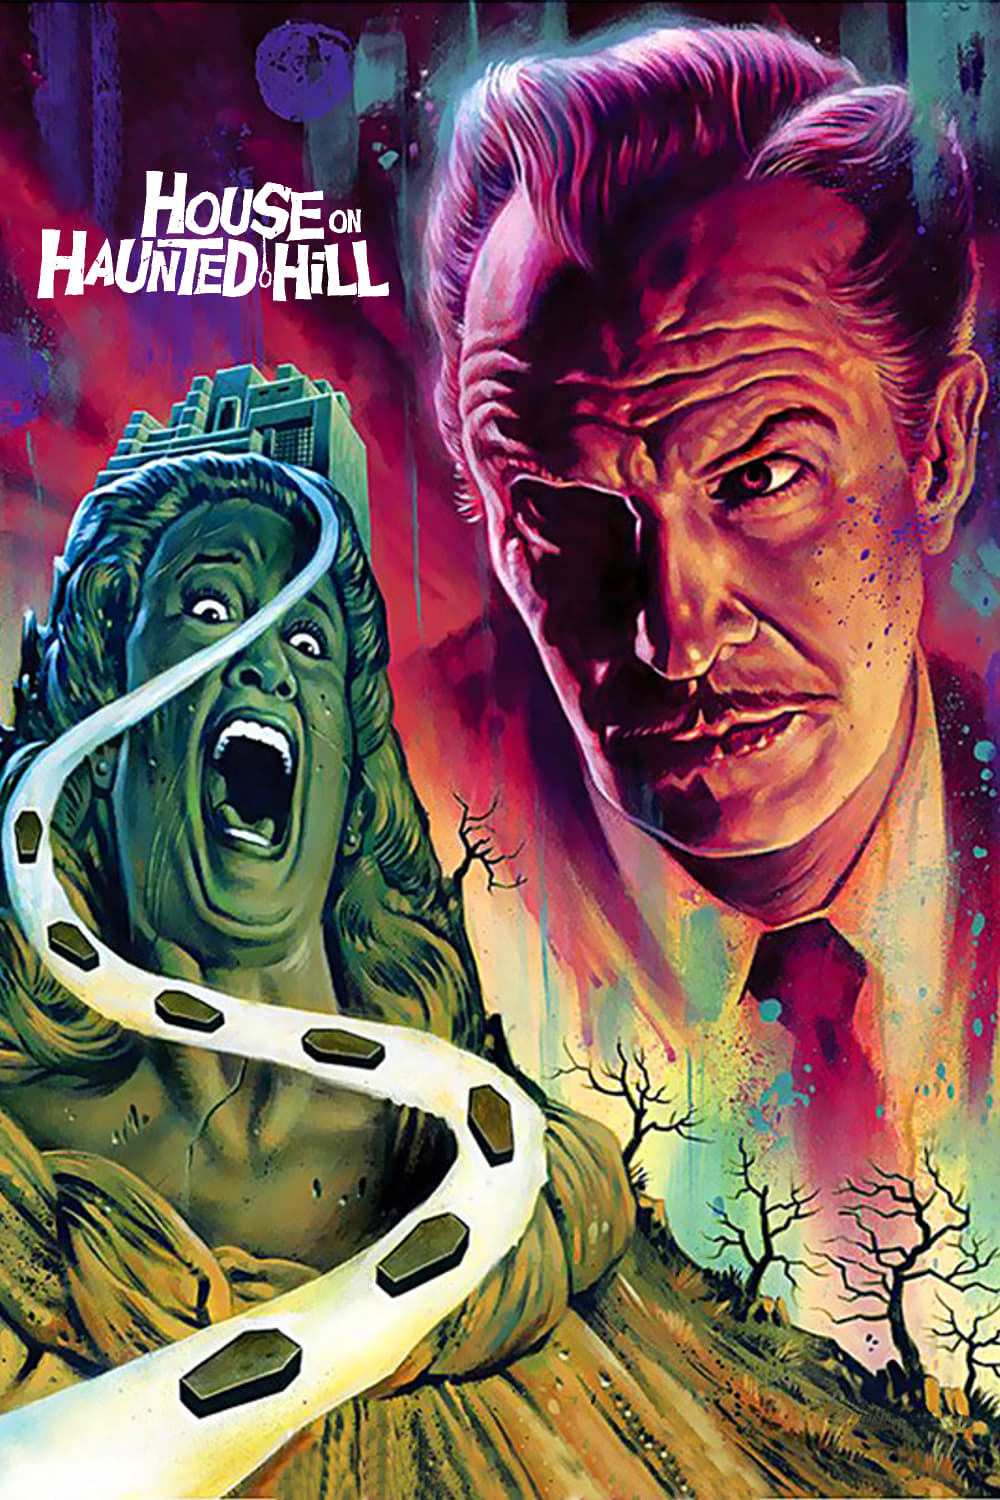 House on Haunted Hill, Vincent Price, Horror, Thriller